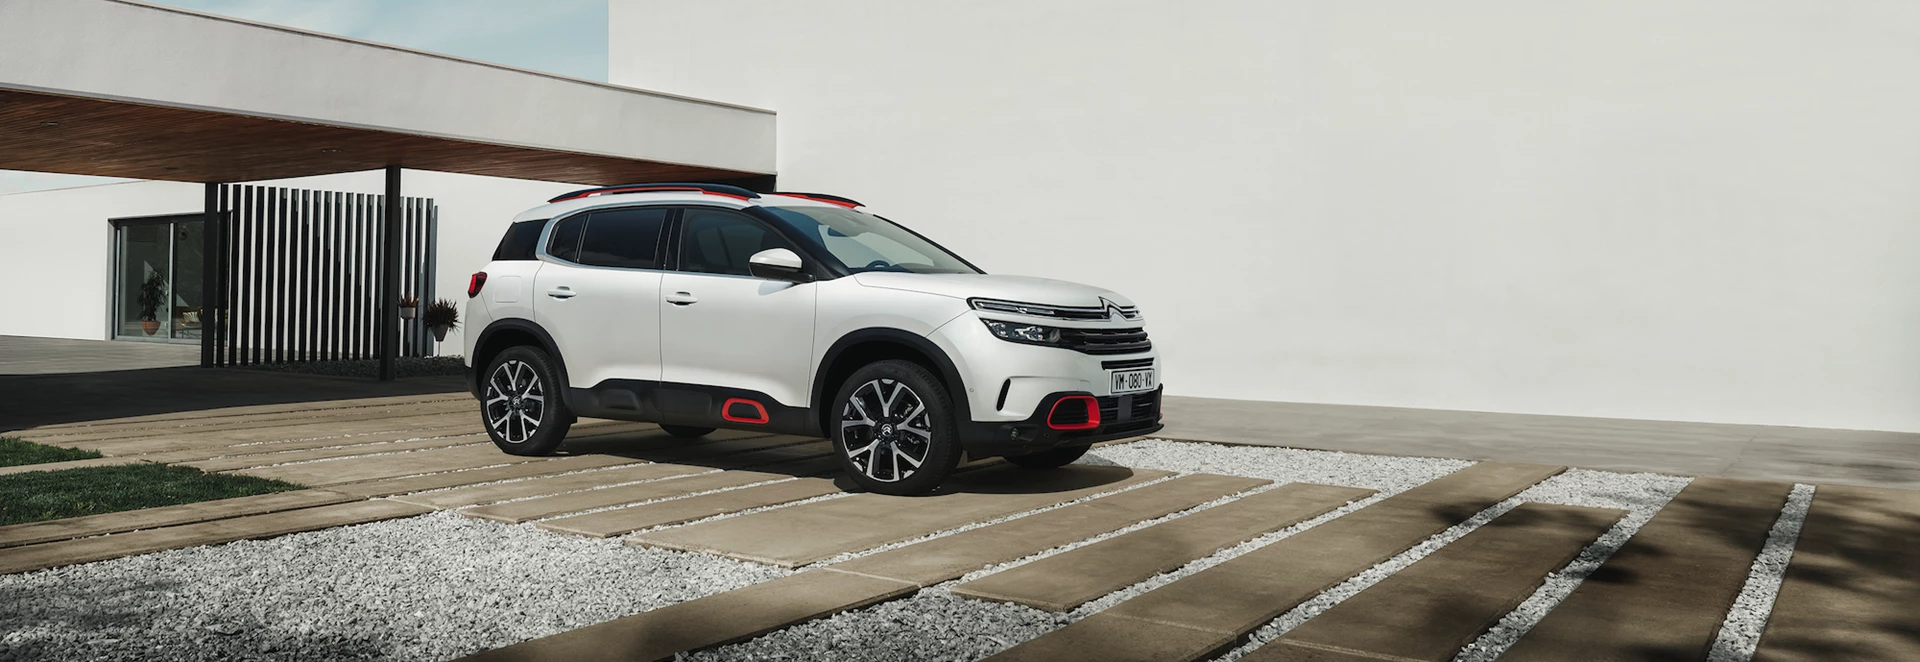 Pricing revealed for new Citroen C5 Aircross